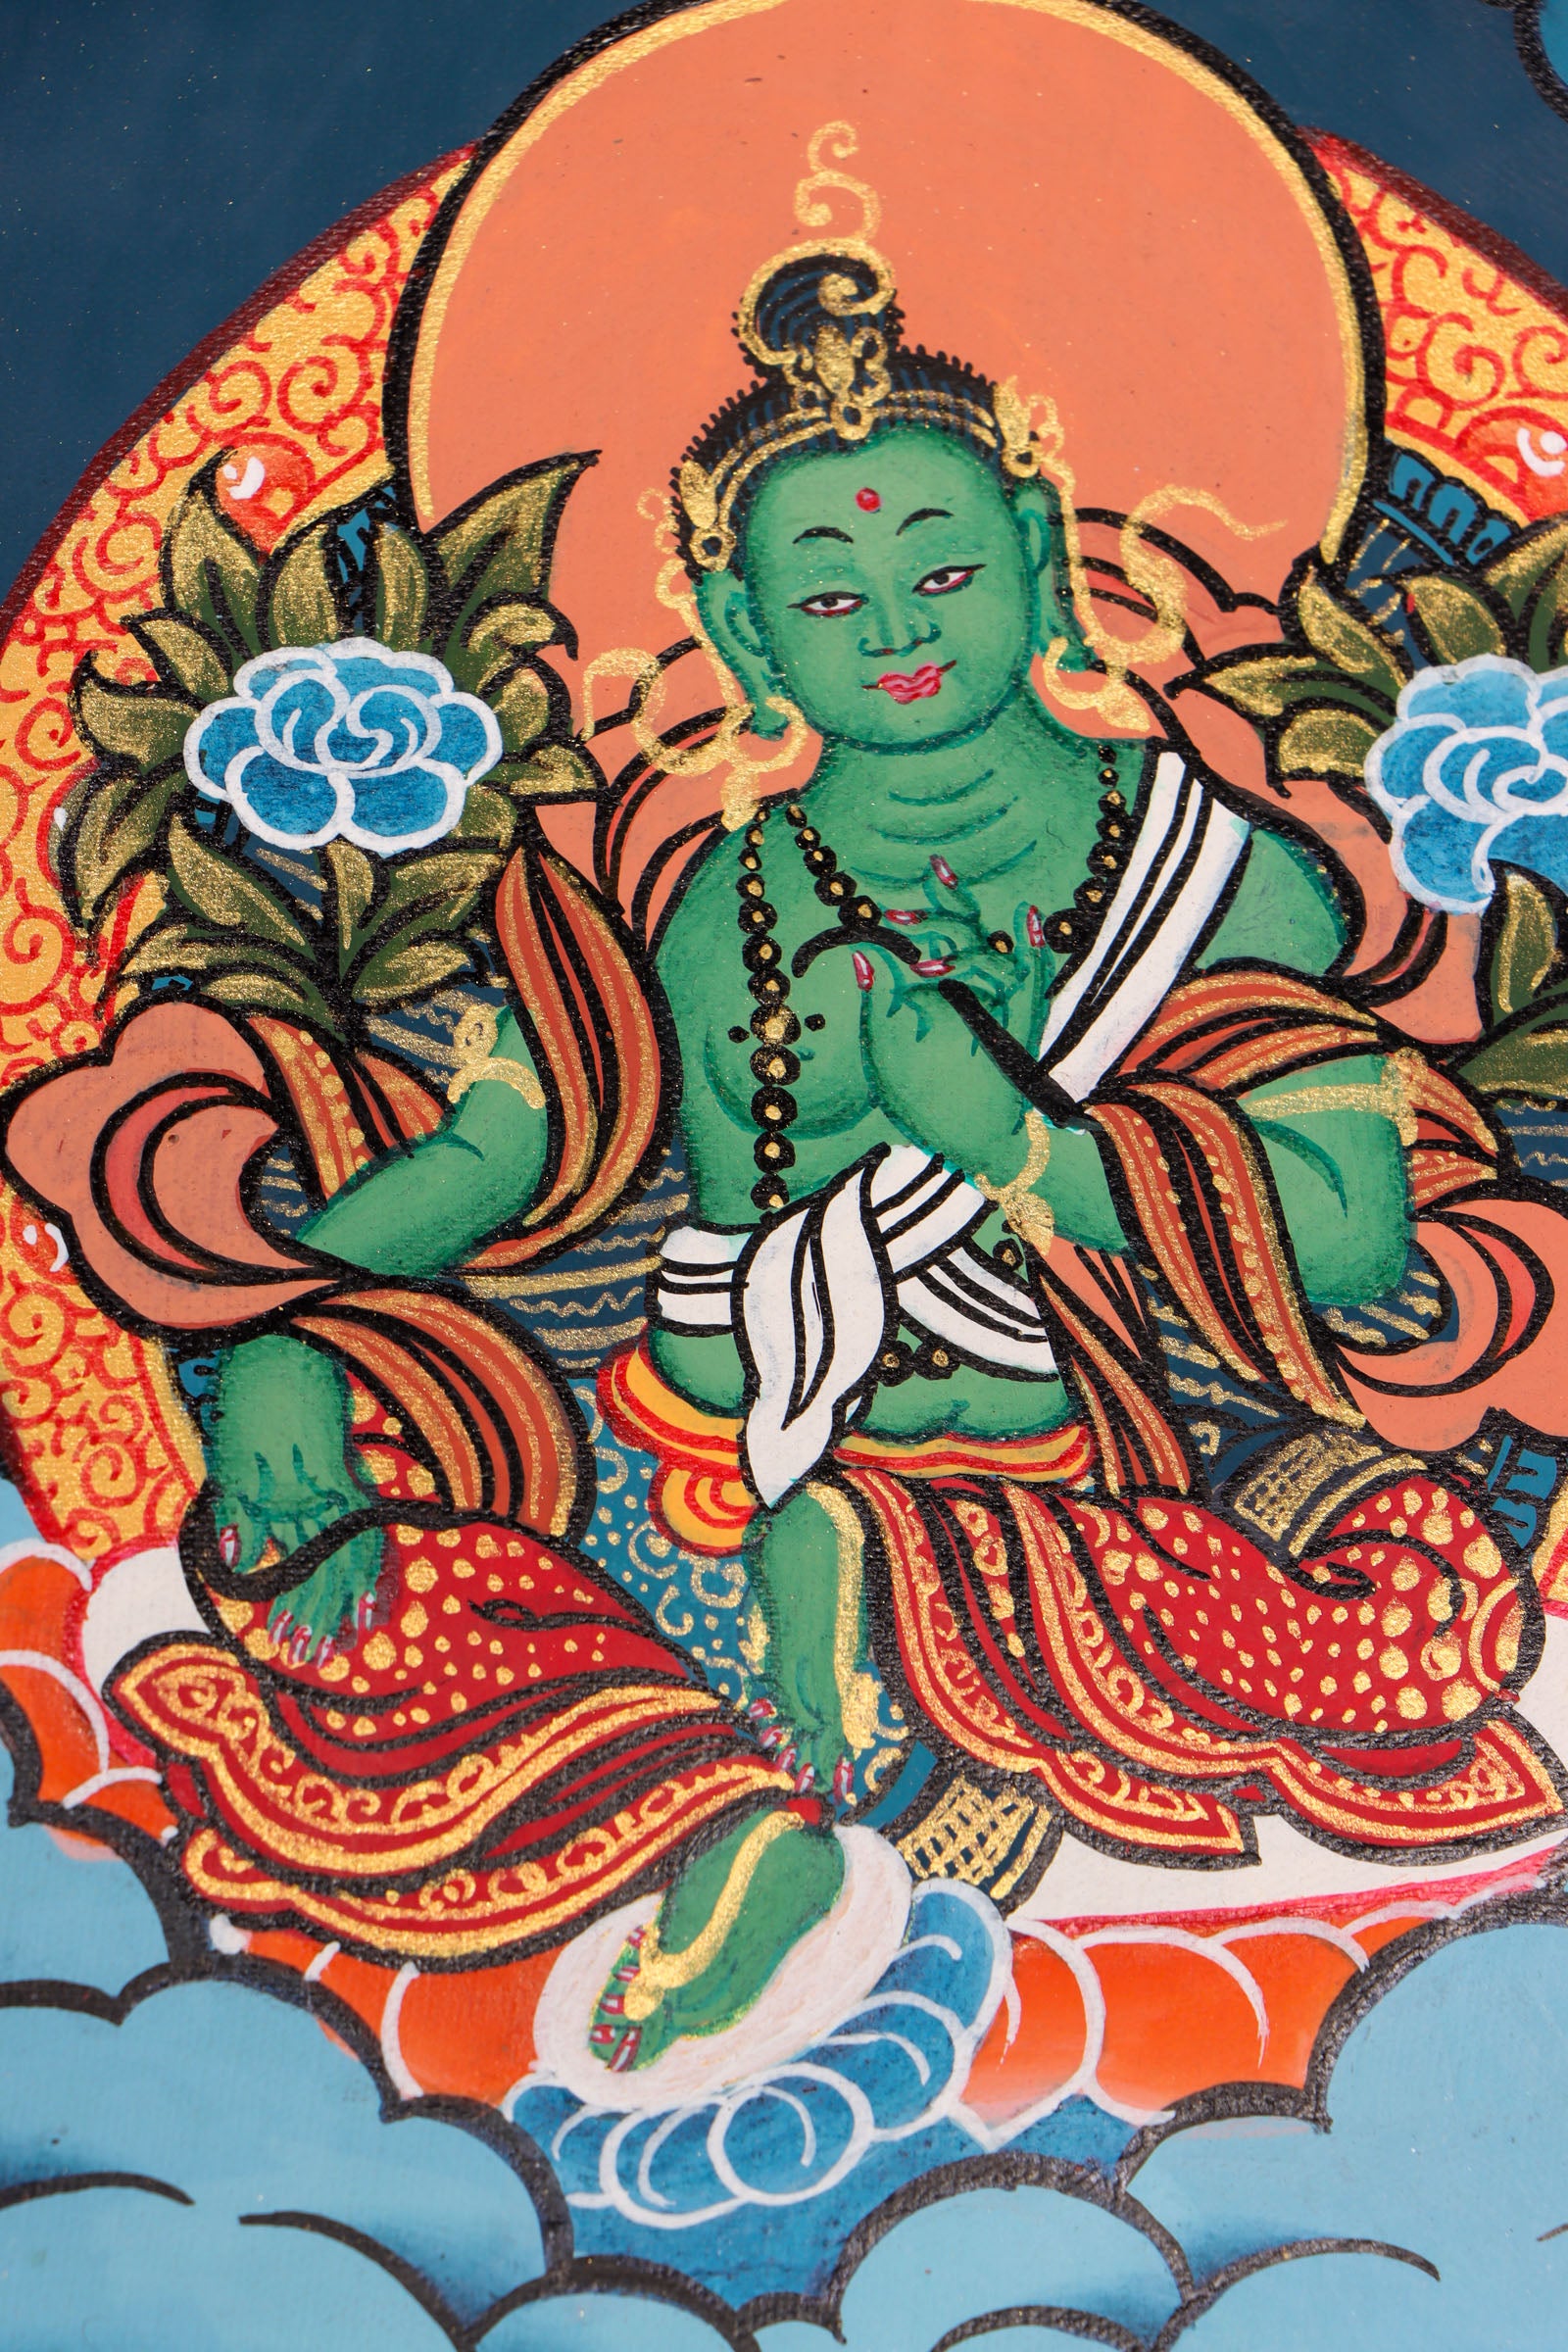 Green Tara Thangka Painting for wisdom and compassion.